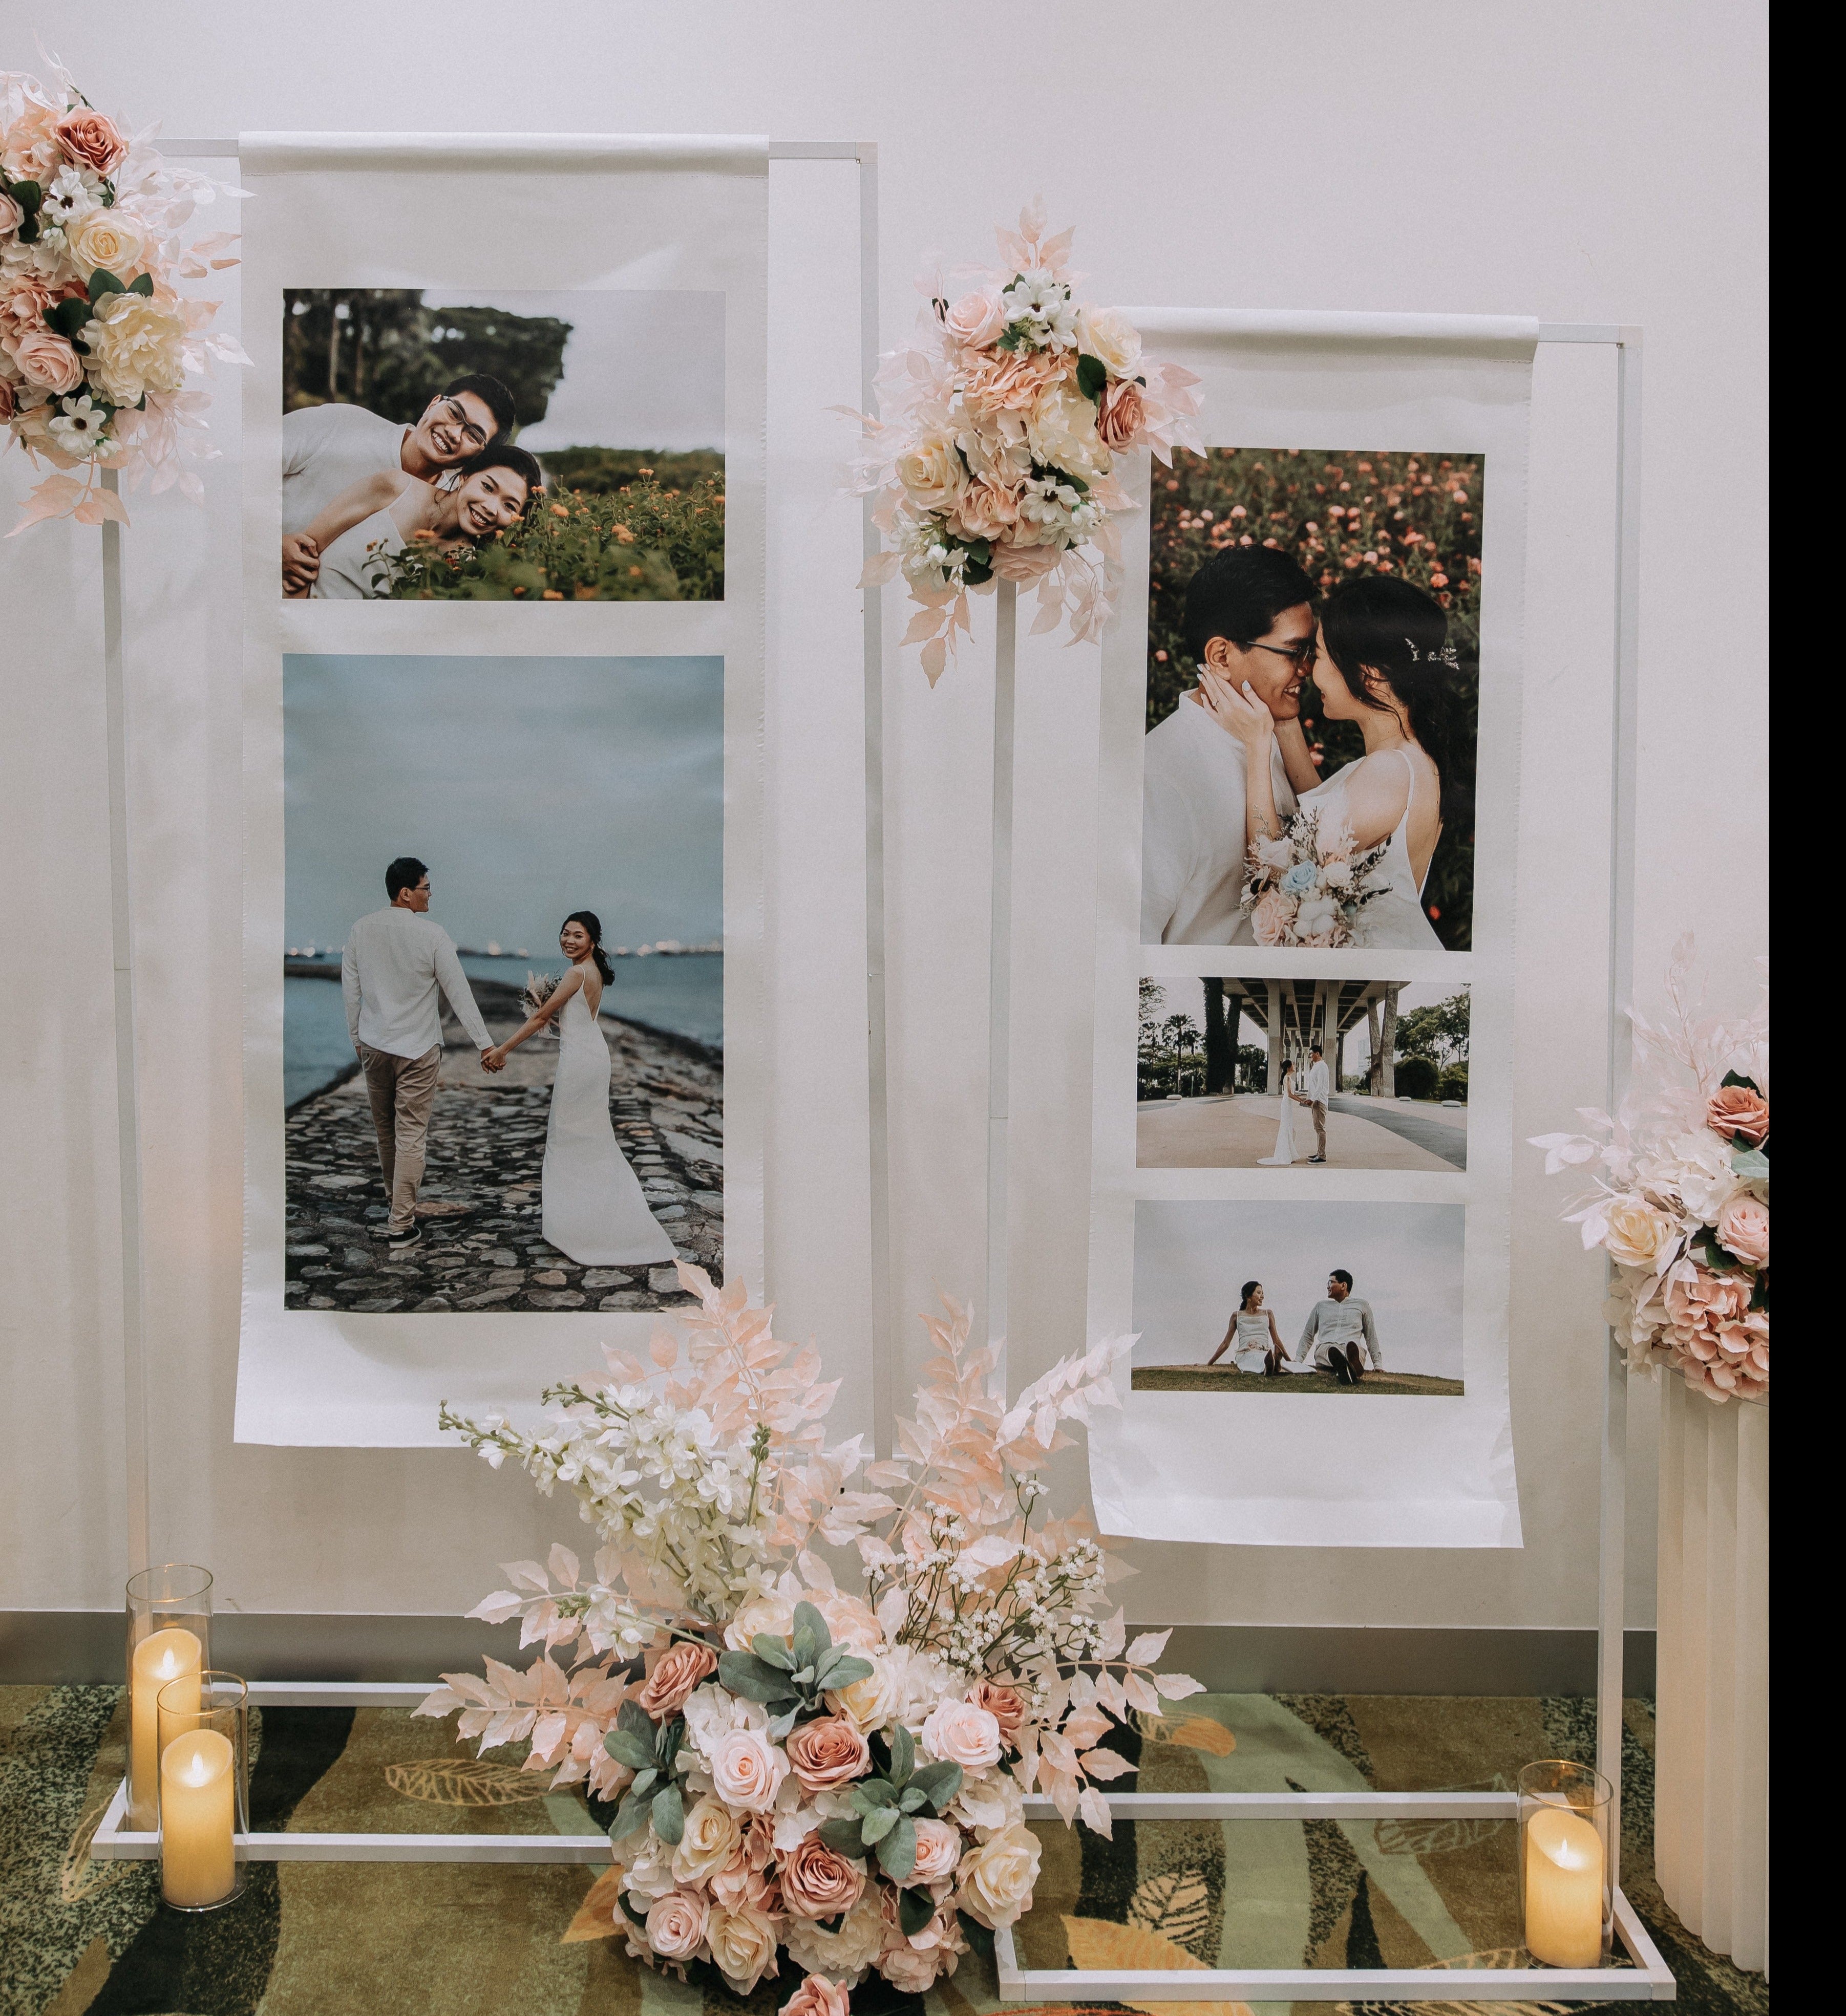 Wedding Reception Decor in Singapore - Multi-stands Photo Gallery with Pink & White Florals (Venue: Mount Faber Peak)